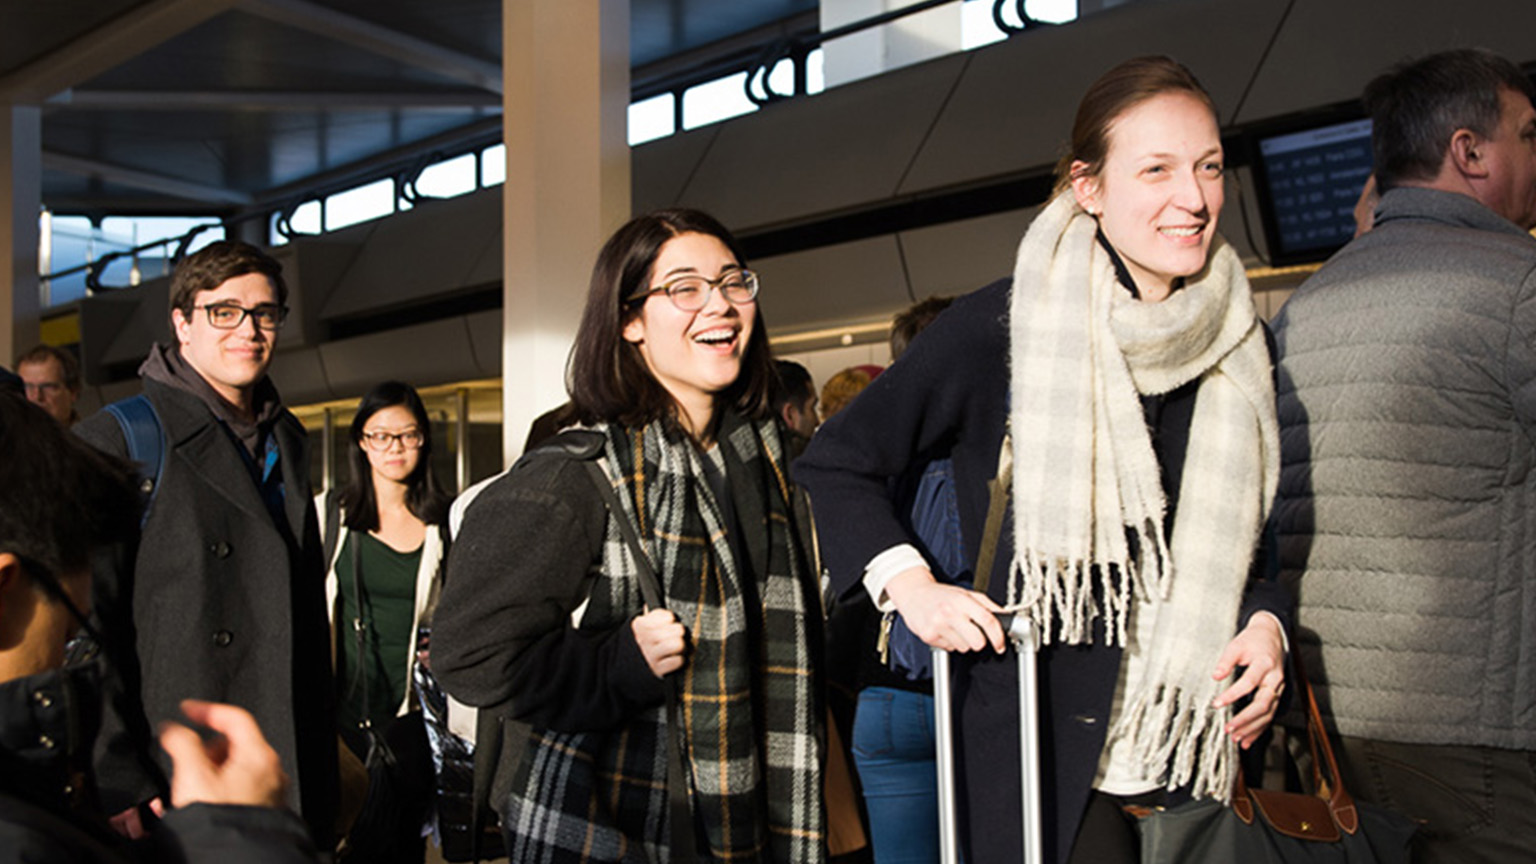 Students walking with their suitcases in an airport ready to begin their international education experience.